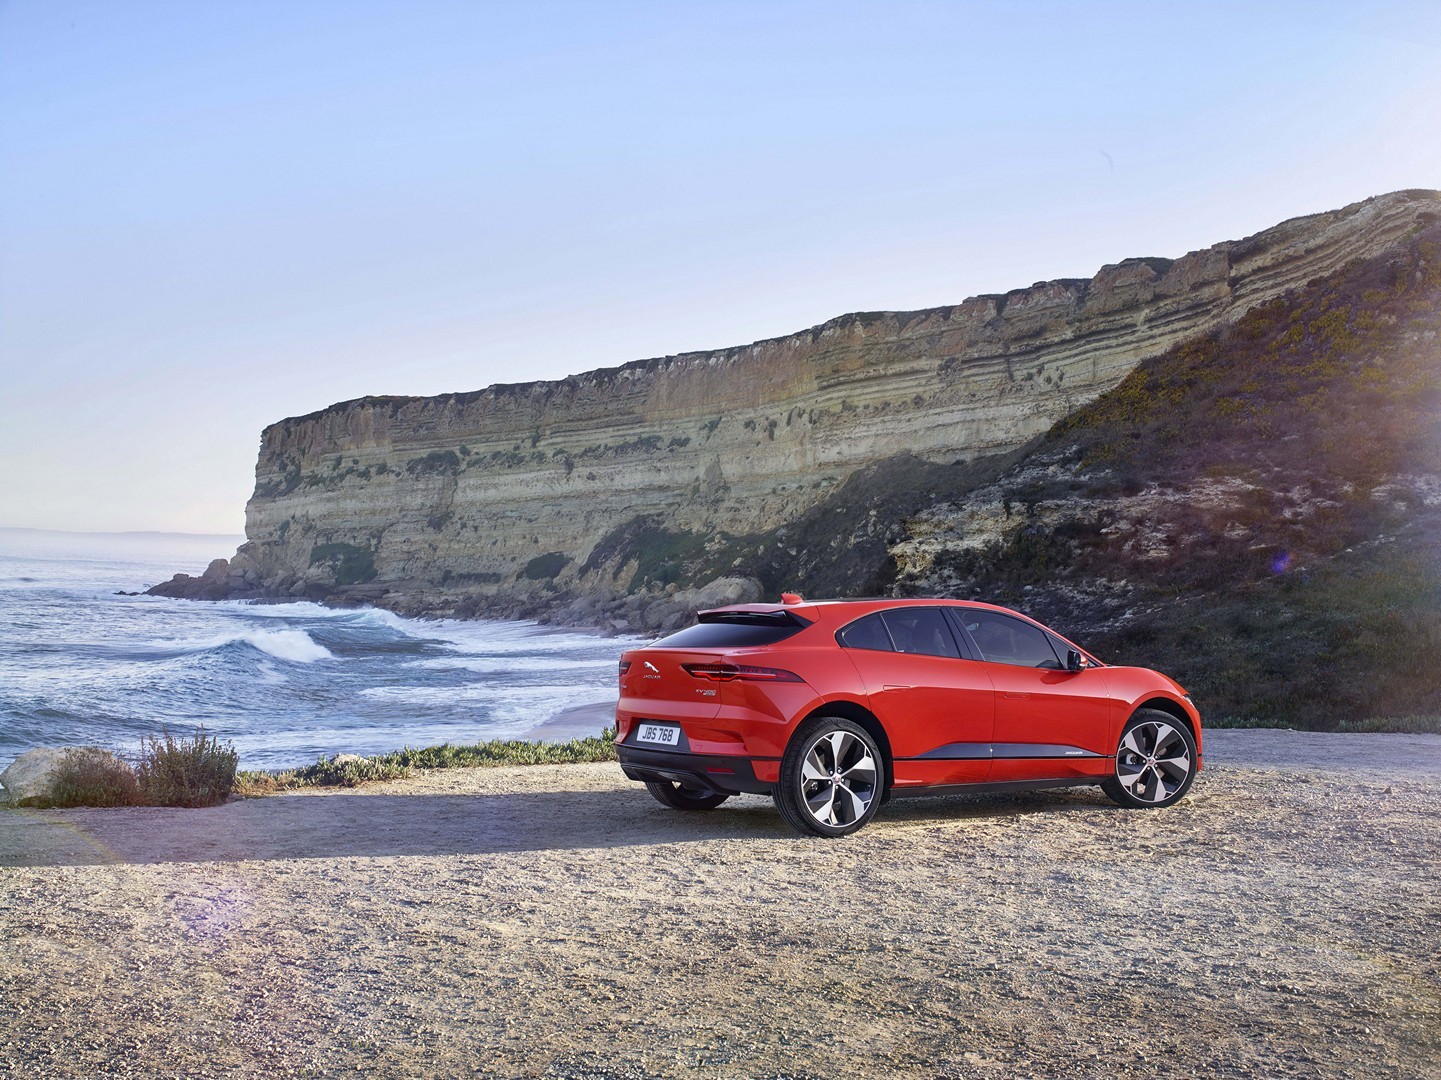 https://s1.cdn.autoevolution.com/images/news/gallery/2020-jaguar-i-pace-update-offers-234-miles-of-range-thanks-to-etrophy-know-how_32.jpg